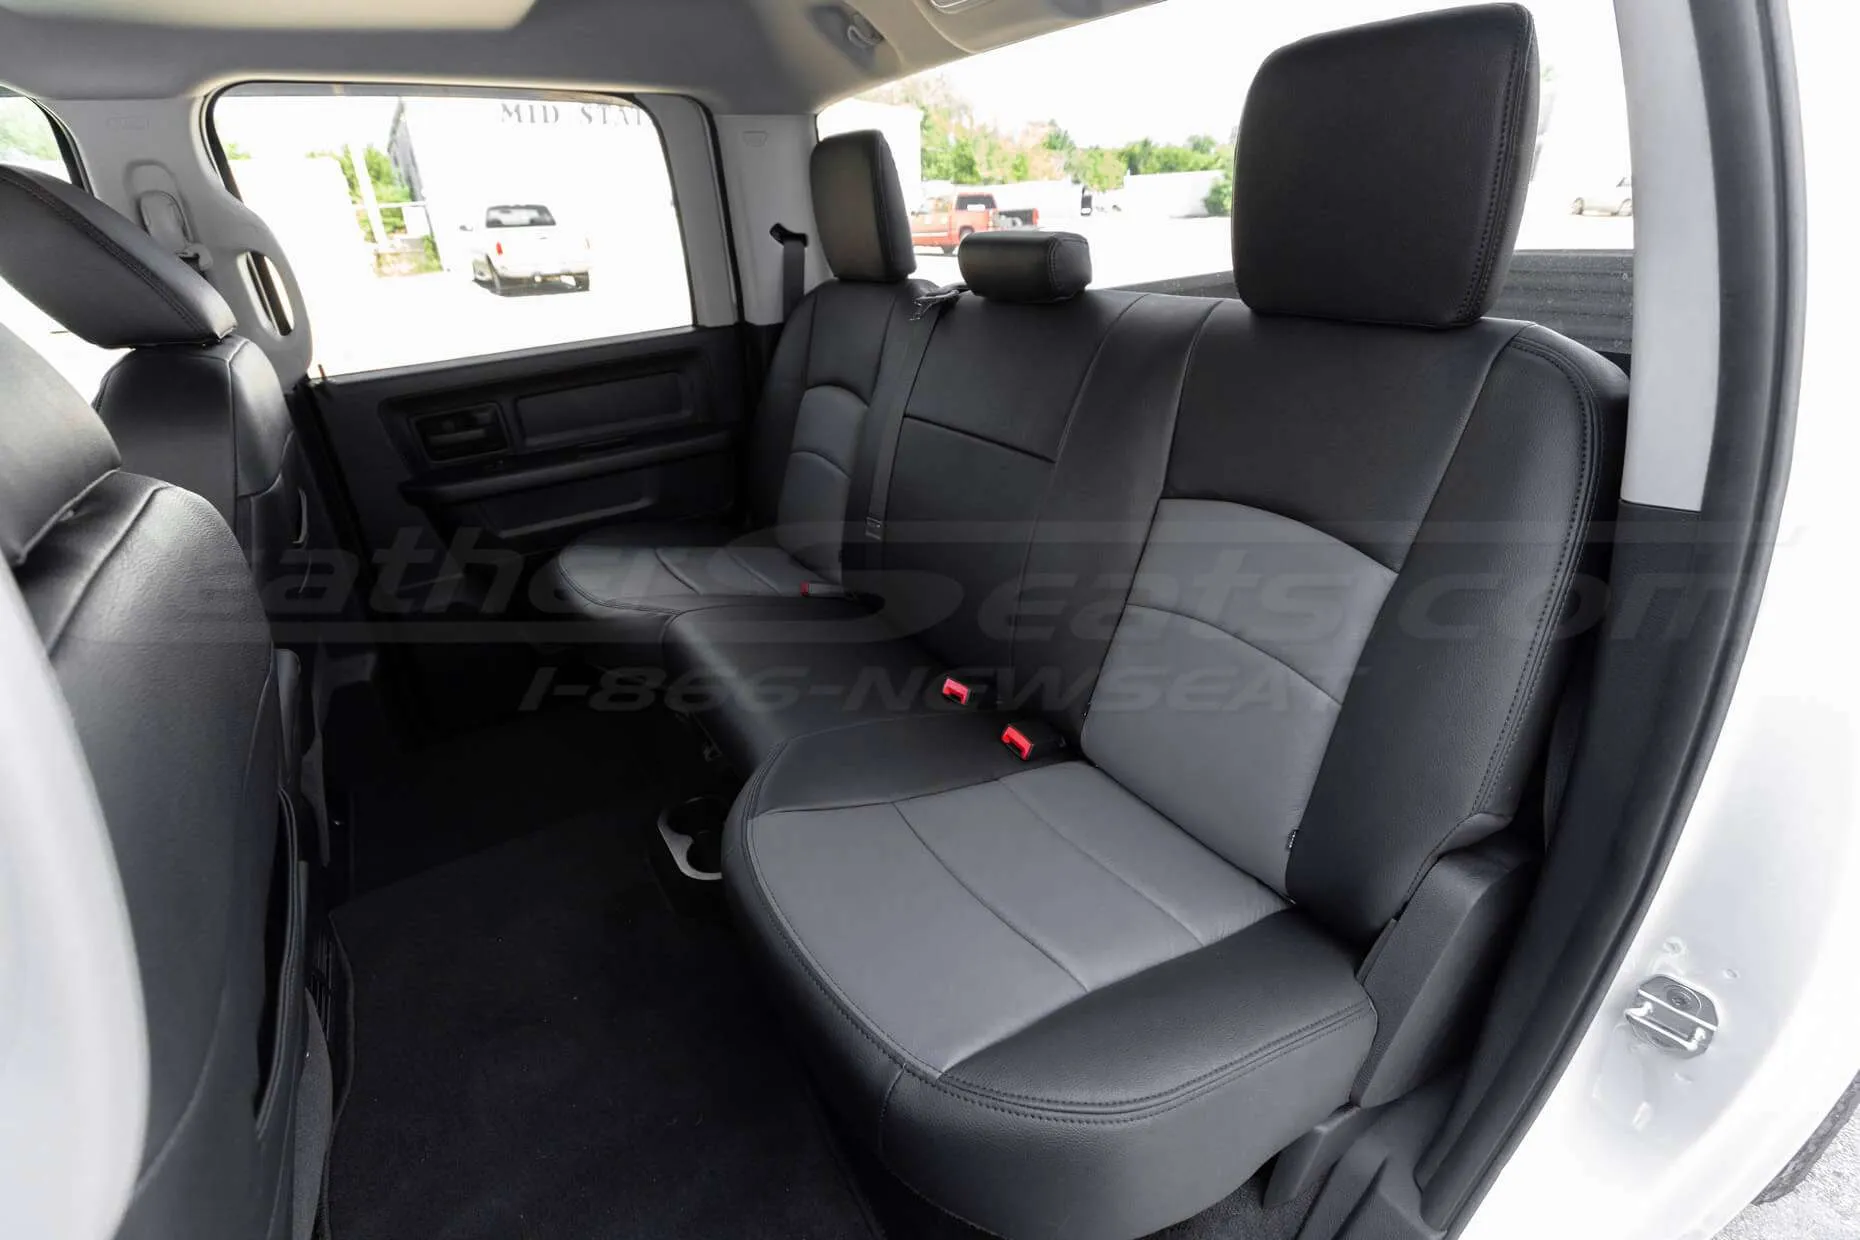 Installed Dodge Ram leather seats installed - Rear seats from driver side